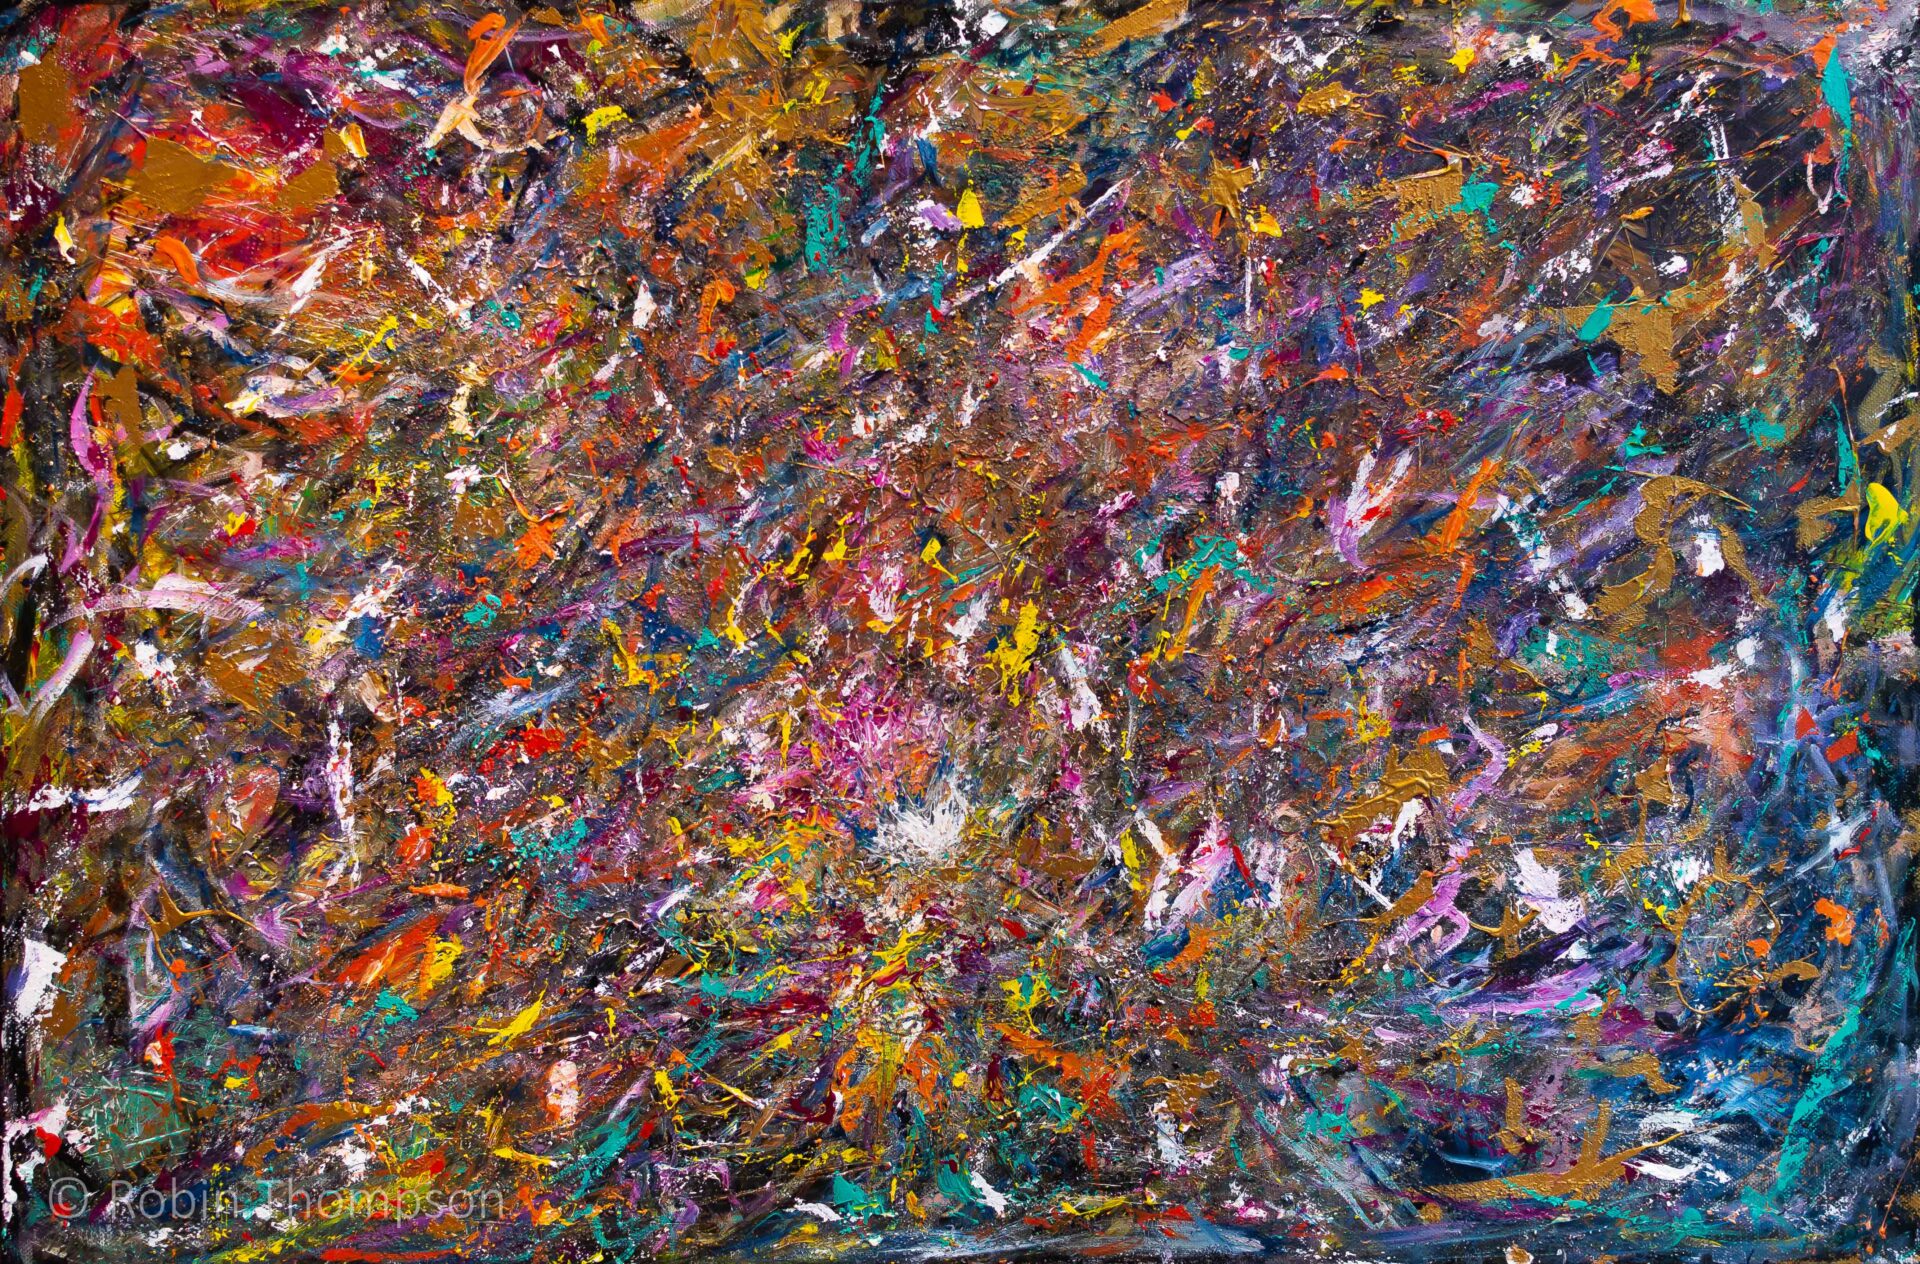 Acrylic abstract expressionism painting showing a large field of colours and non-figurative forms. Expressive brushstrokes and multiple overlapping fields of colour combine to create a chaotic feeling.